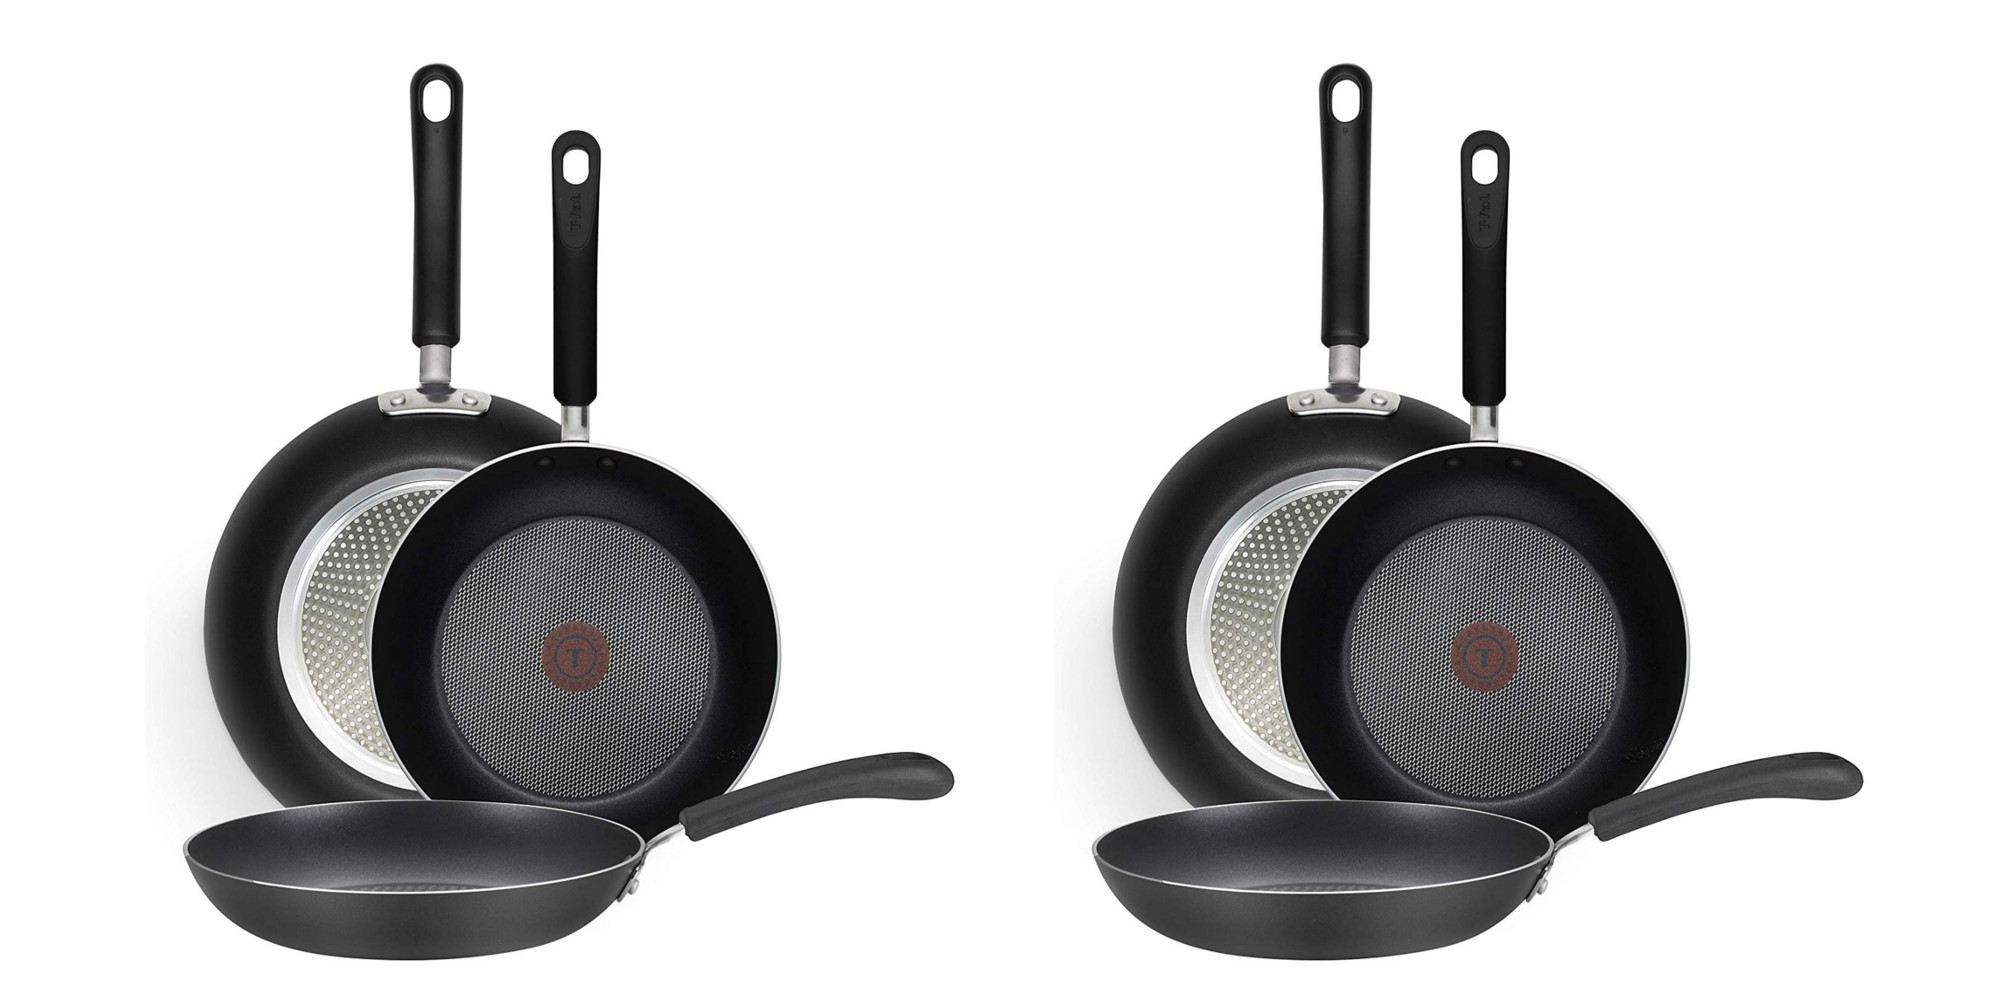 https://9to5toys.com/wp-content/uploads/sites/5/2019/08/T-fal-Professional-Total-Nonstick-Fry-Pan-Cookware-Set-E938S3.jpg